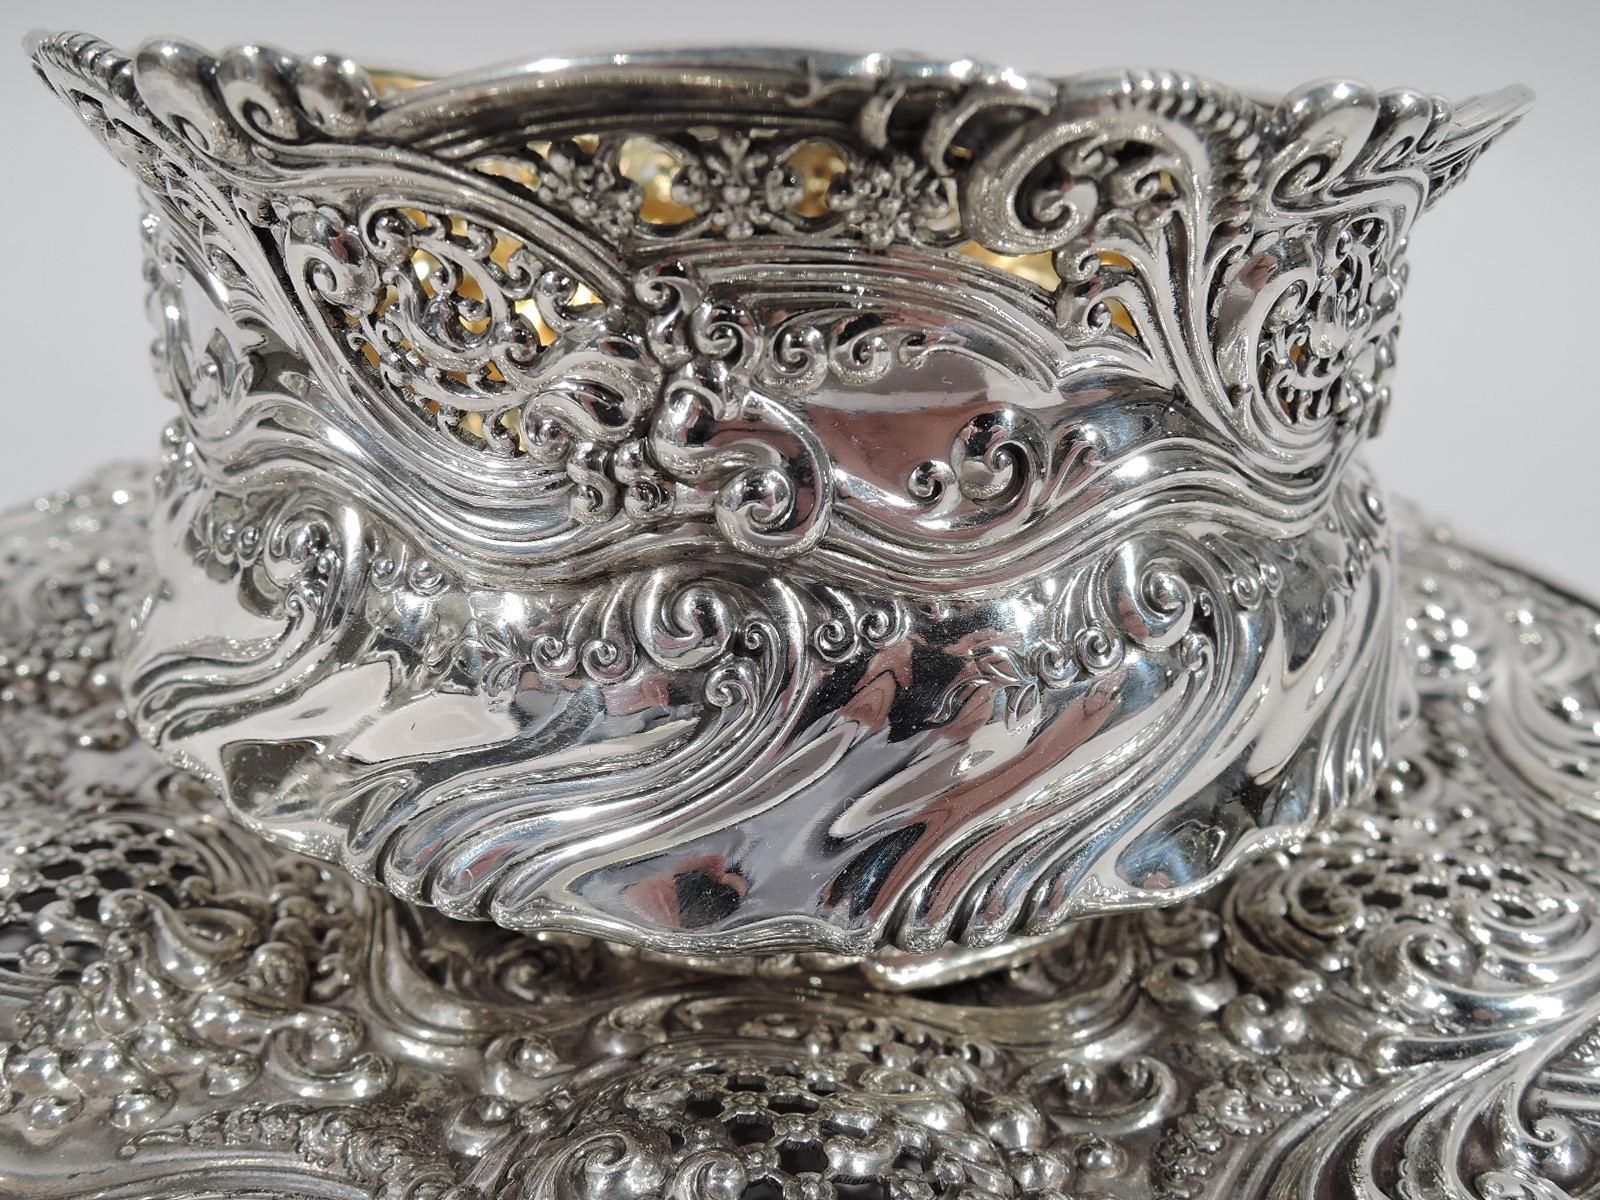 Sterling silver bowl on plate made by Tiffany & Co. in New York. Bowl: Squat with wavy and flared rim and short scrolled foot with bracket supports. Gilt interior. Plate: Round with scalloped rim. Plain and deep wavy star well with chased scrolls at